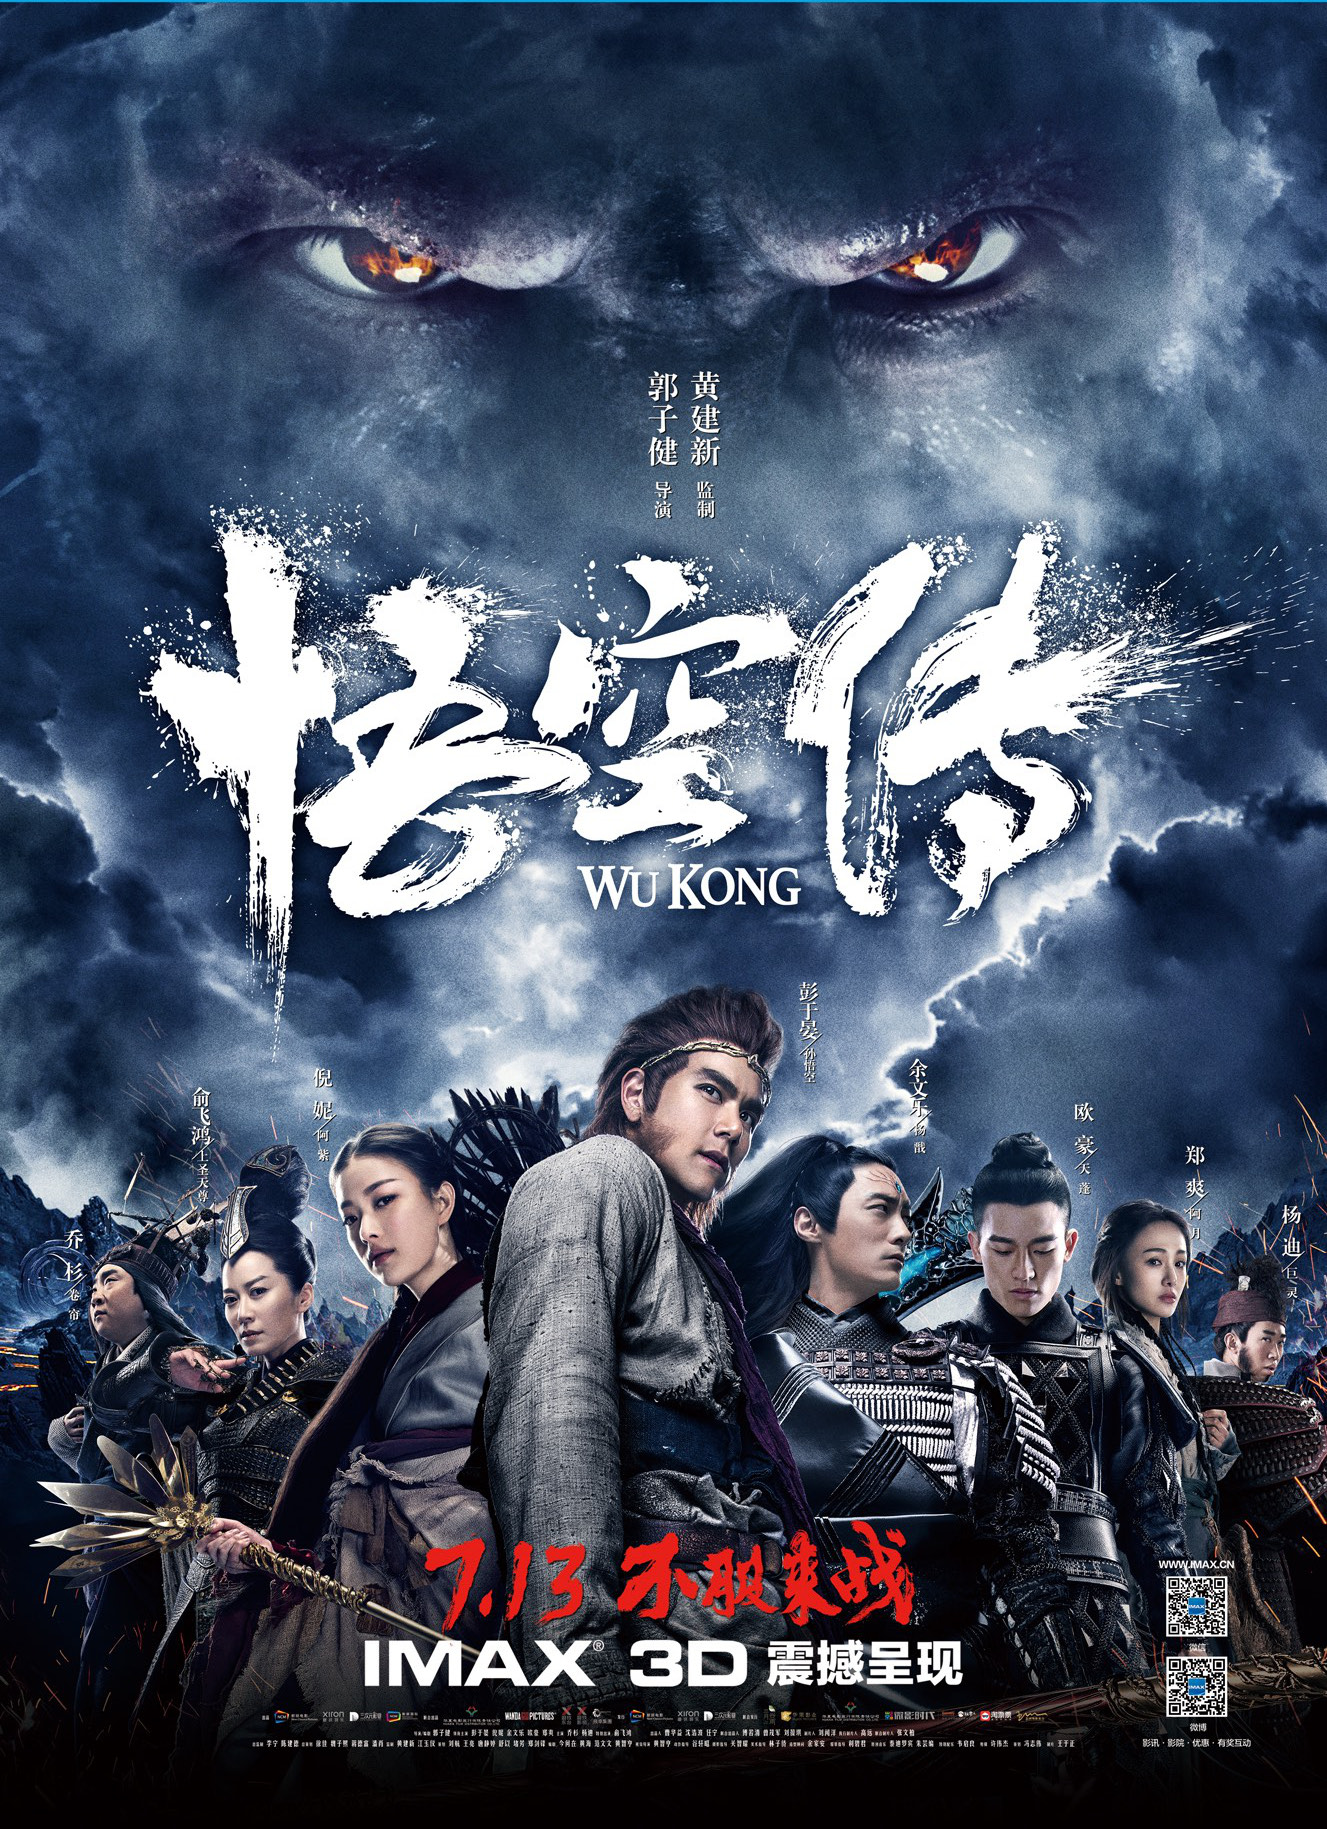 WuKong (2017) with English Subtitles on DVD on DVD